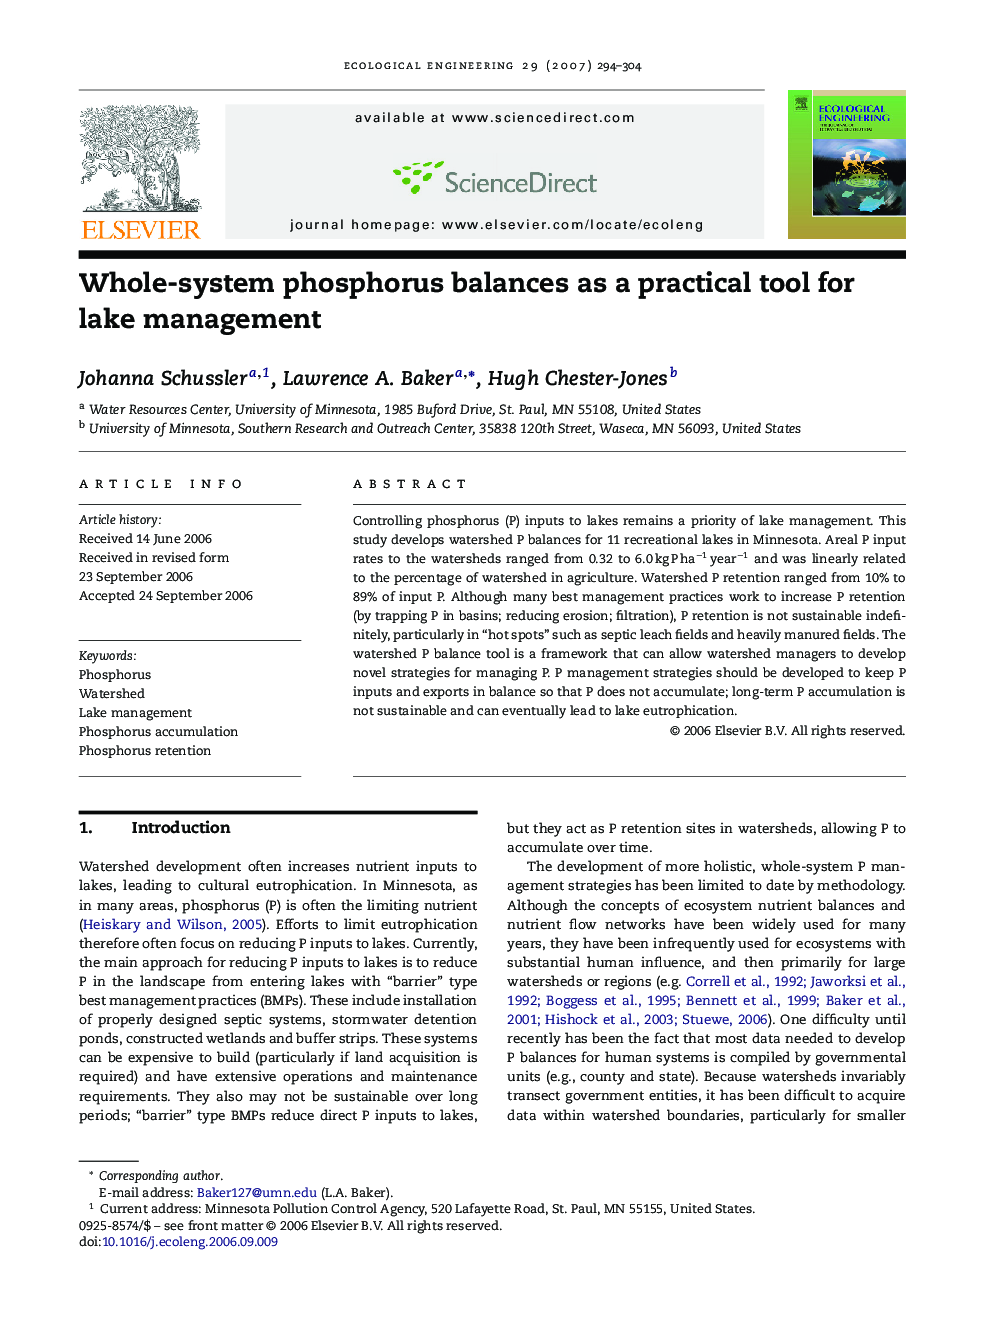 Whole-system phosphorus balances as a practical tool for lake management